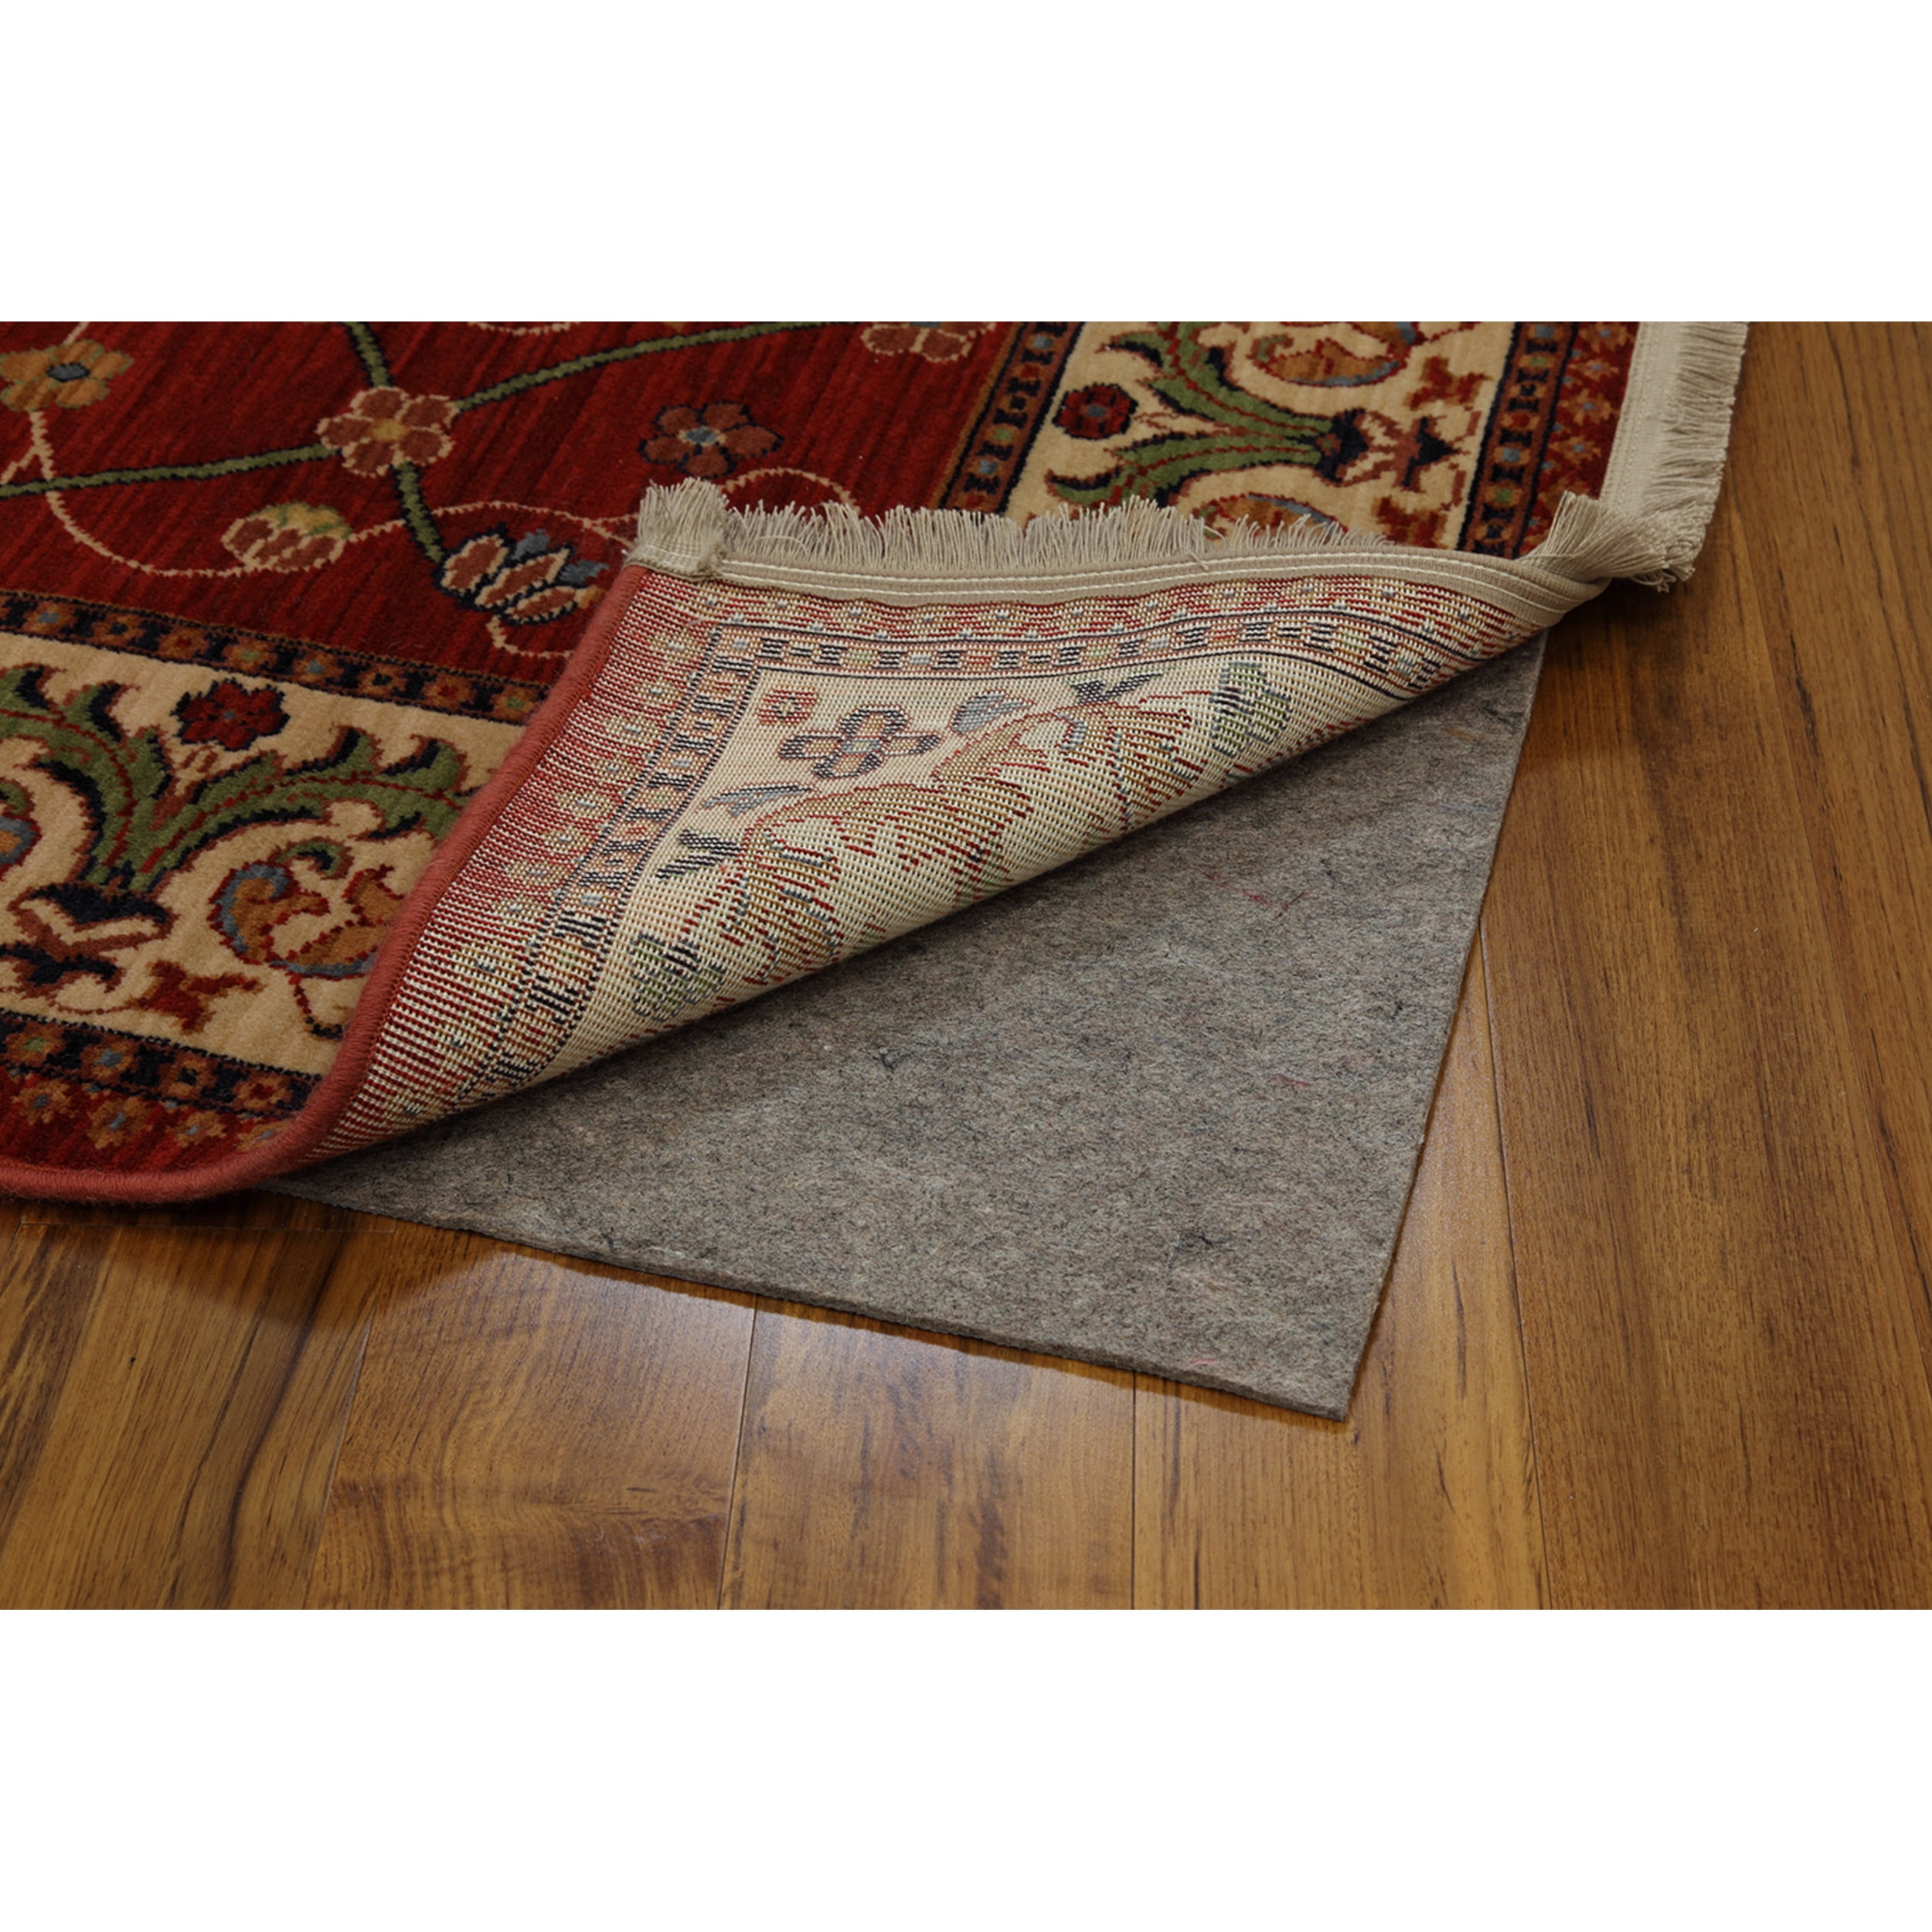 NEW: Area Rug Pad: Make Offer on Mohawk 9 X 13 - general for sale